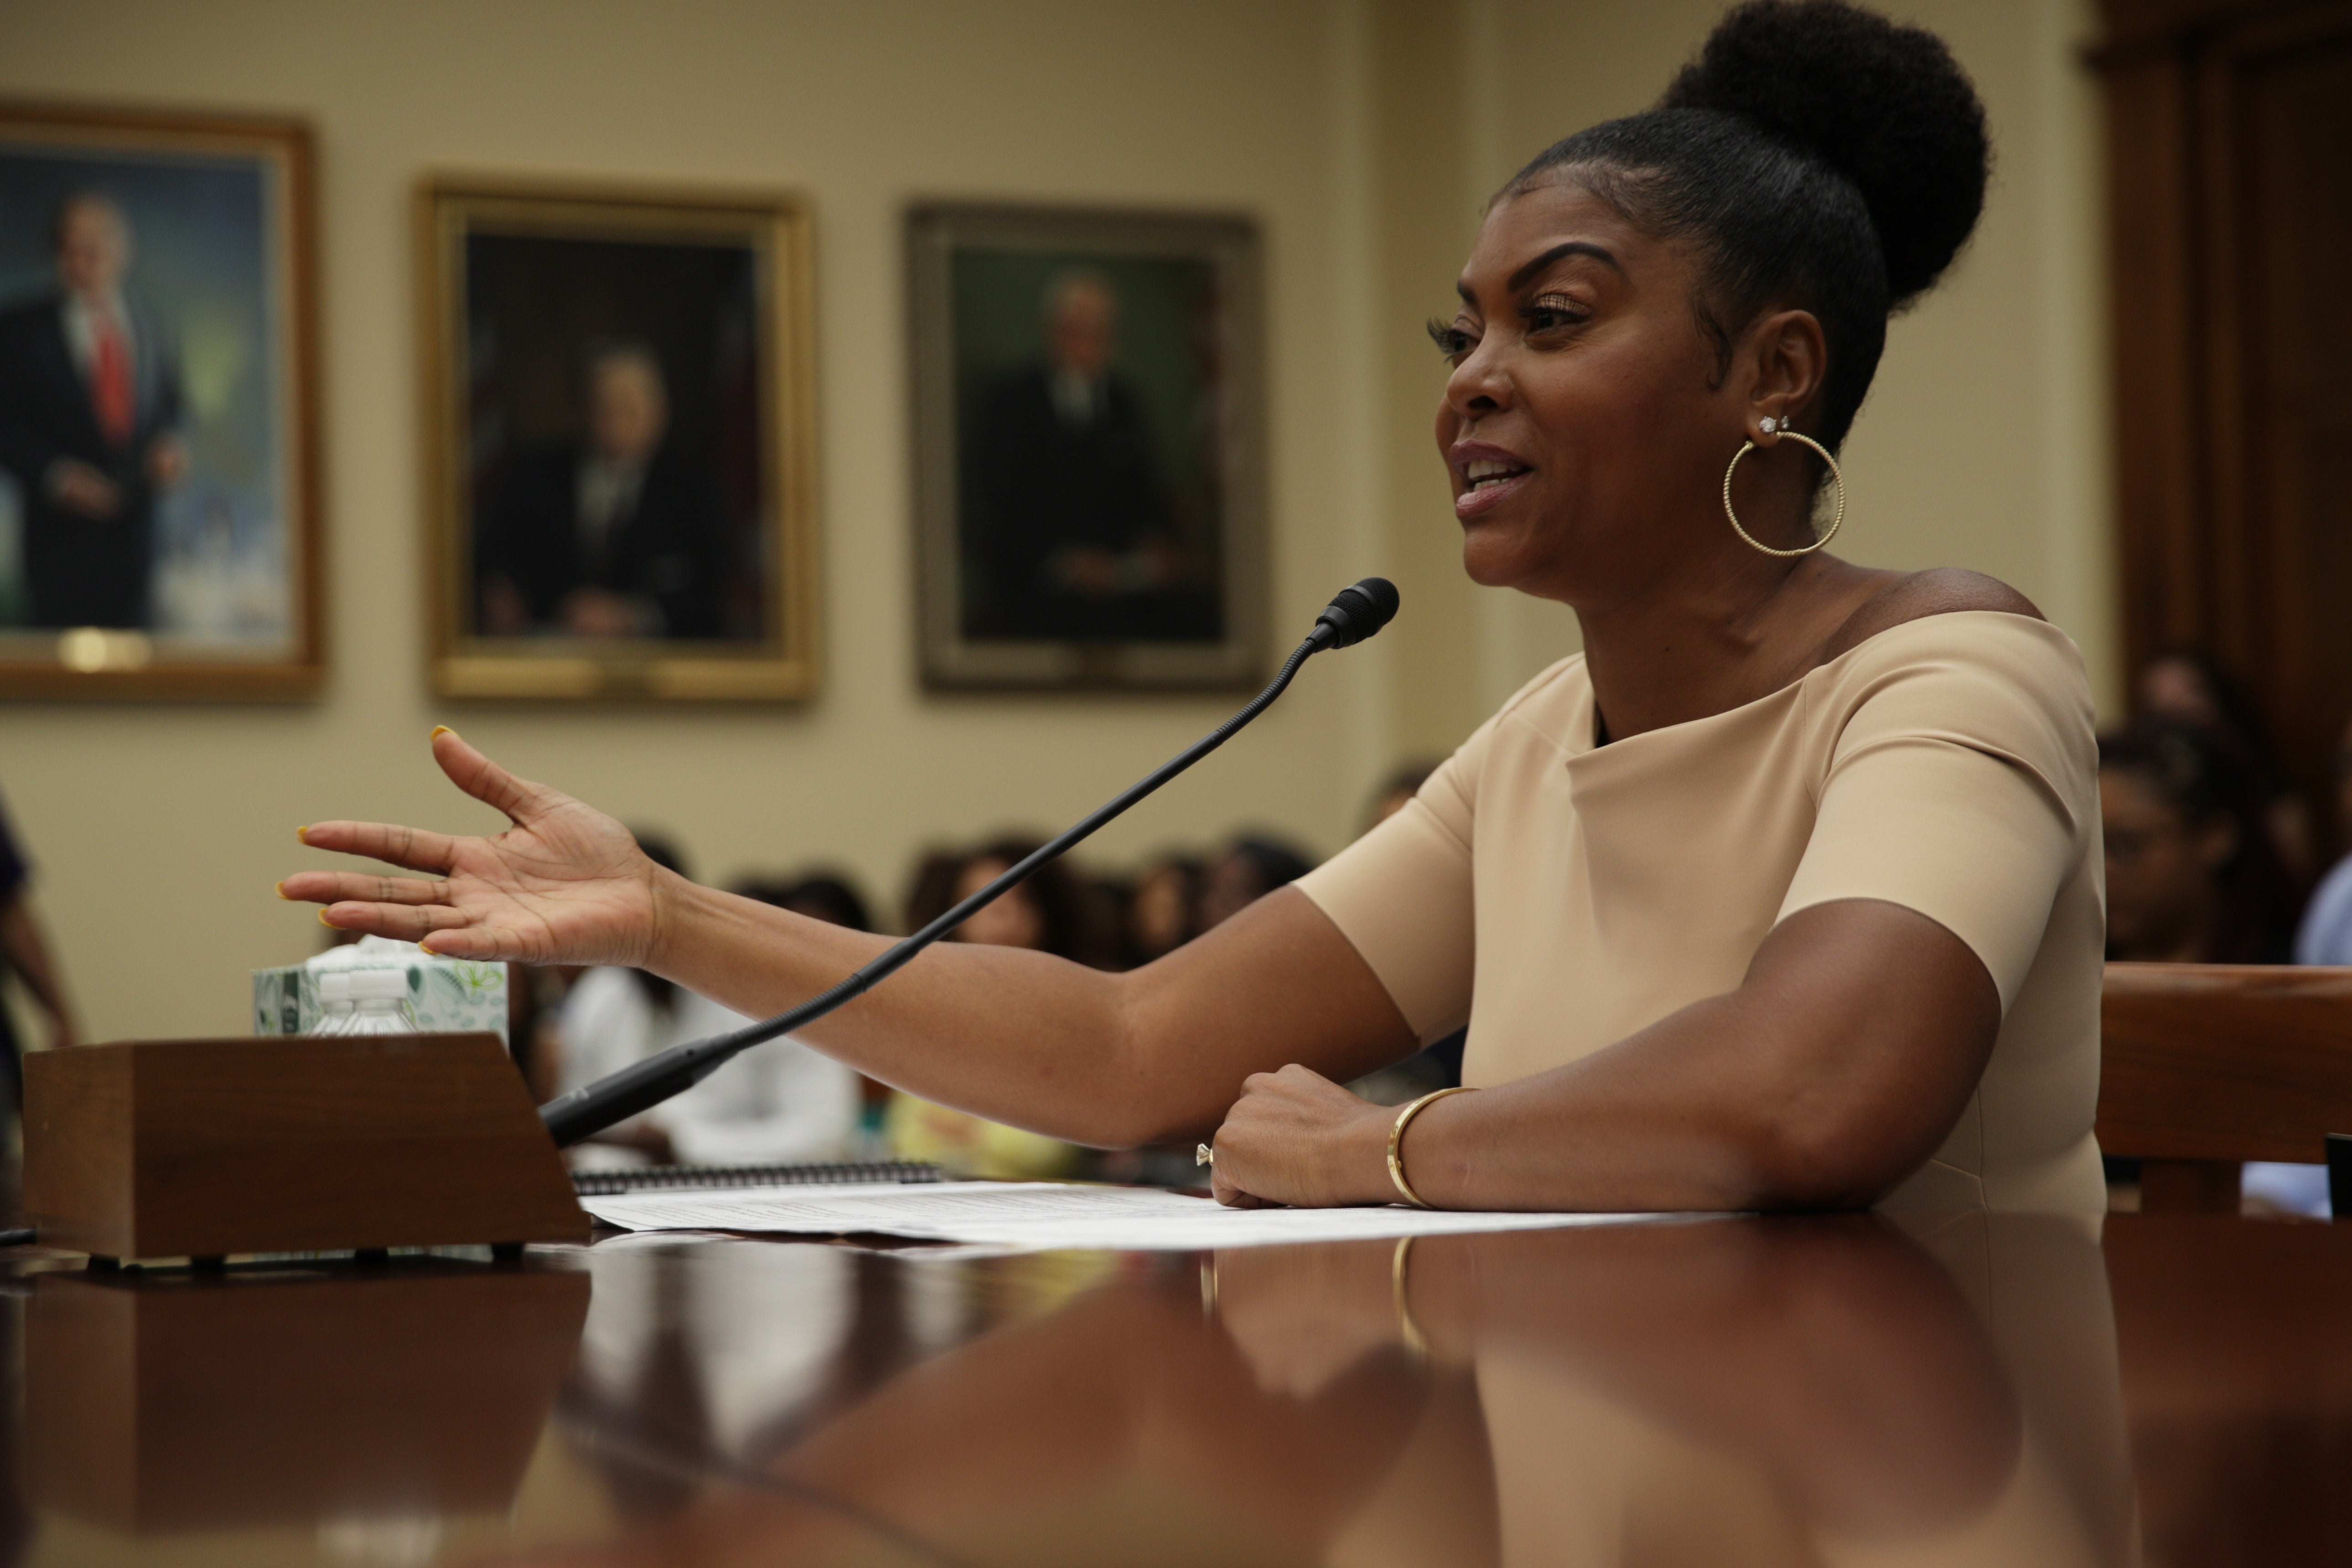 Taraji P. Henson Gives An Emotional Testimony To Congress On Mental Health Among Black Youth: ‘This Is A National Crisis’